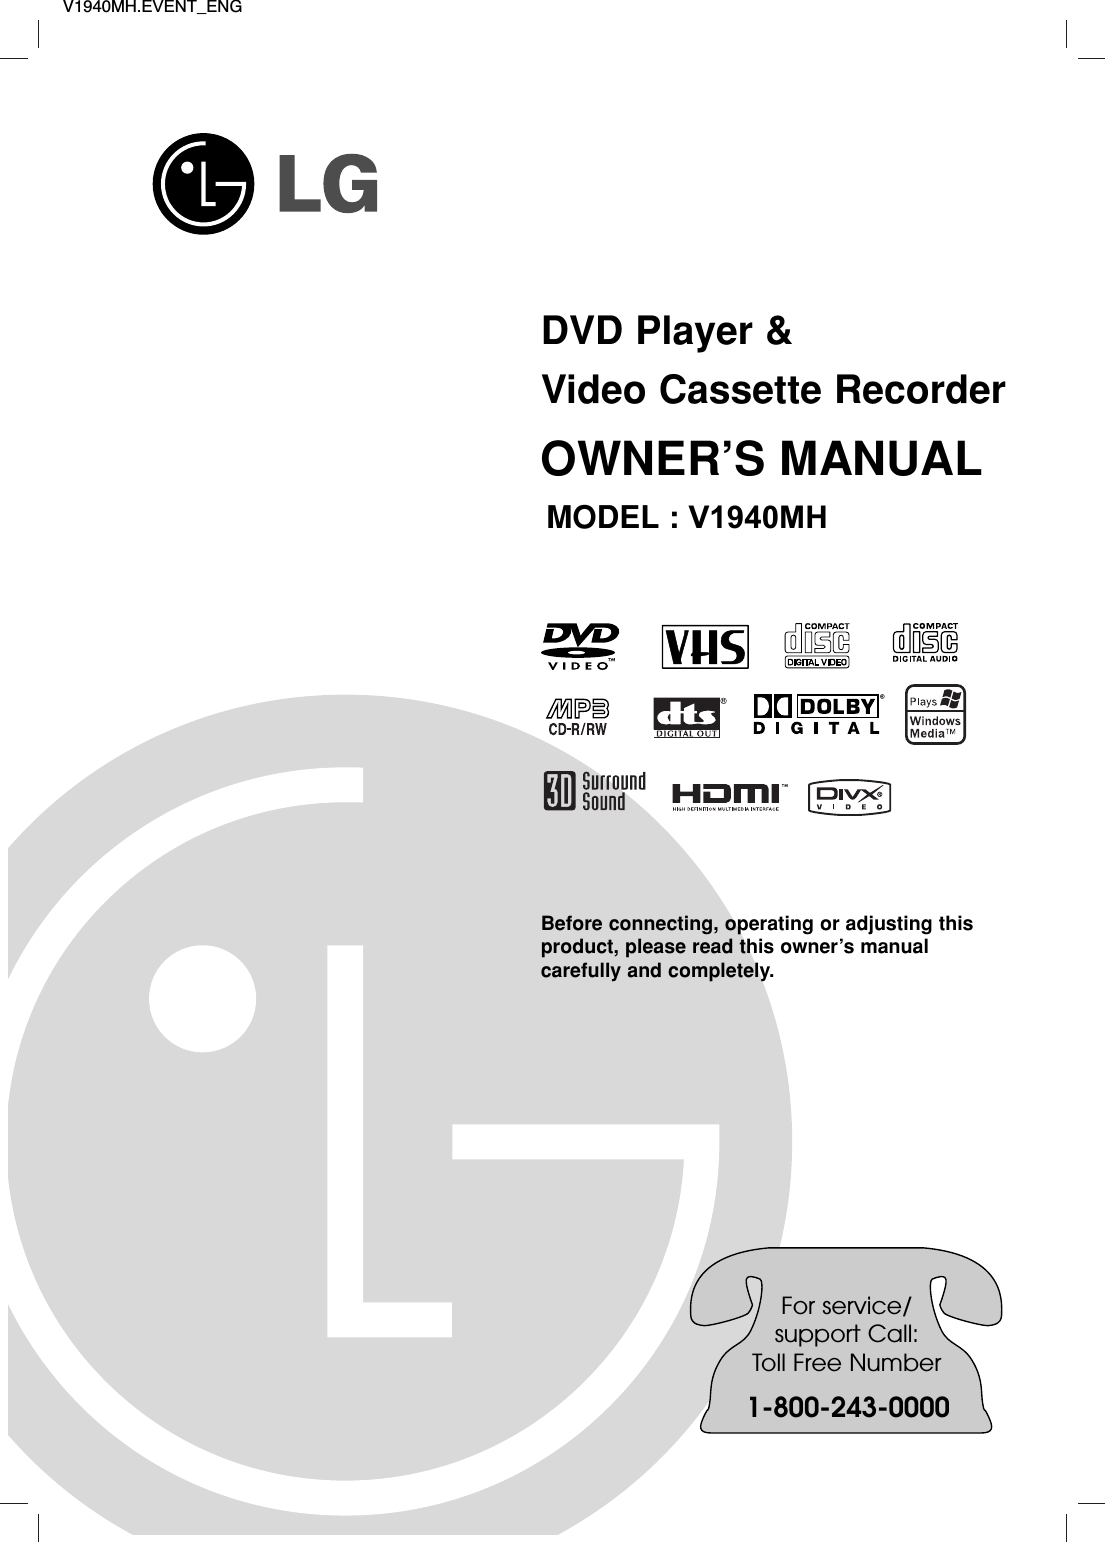 V1940MH.EVENT_ENGBefore connecting, operating or adjusting thisproduct, please read this owner’s manual carefully and completely.DVD Player &amp;Video Cassette RecorderOWNER’S MANUALMODEL : V1940MHFor service/support Call:Toll Free Number1-800-243-0000